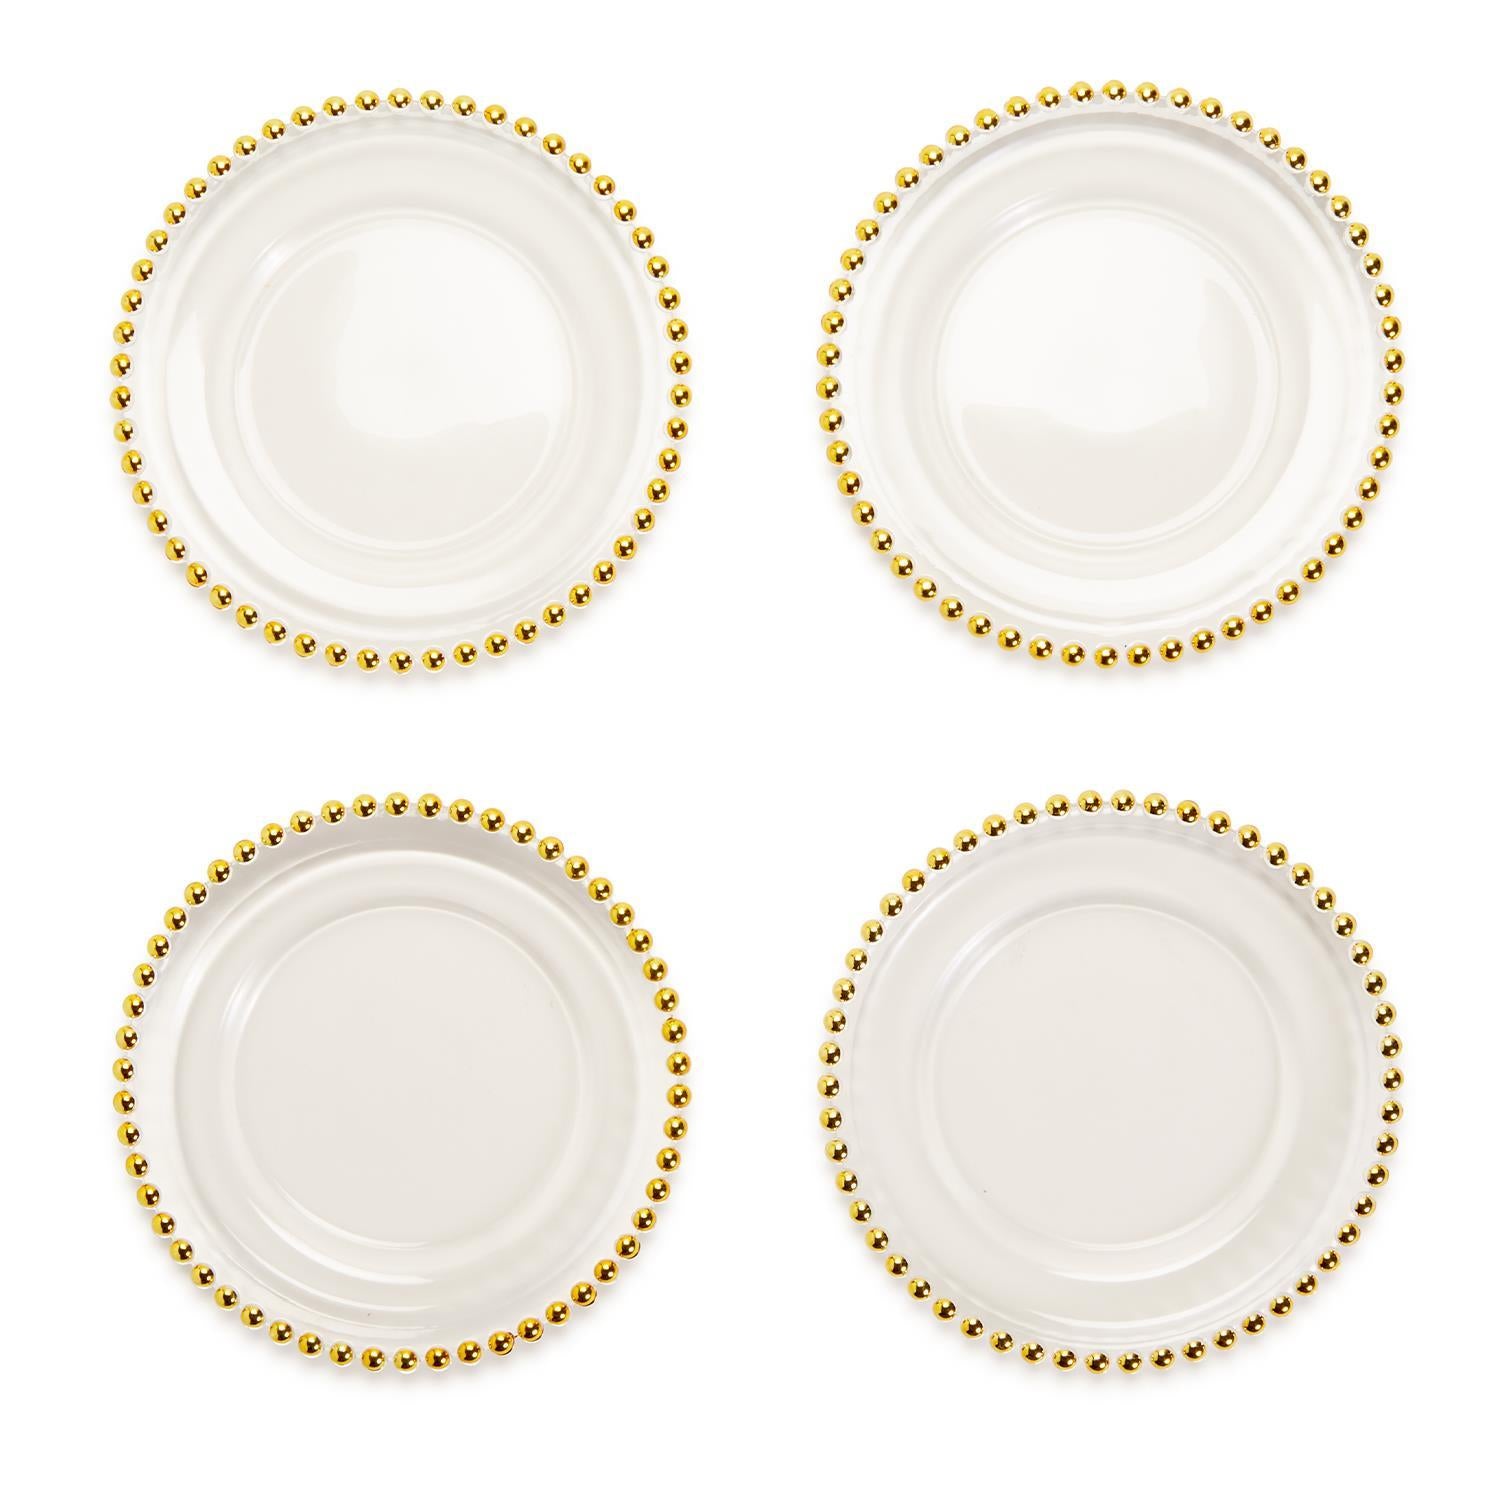 Two's Company Golden Beads S/4 Appetizer / Dessert Plates